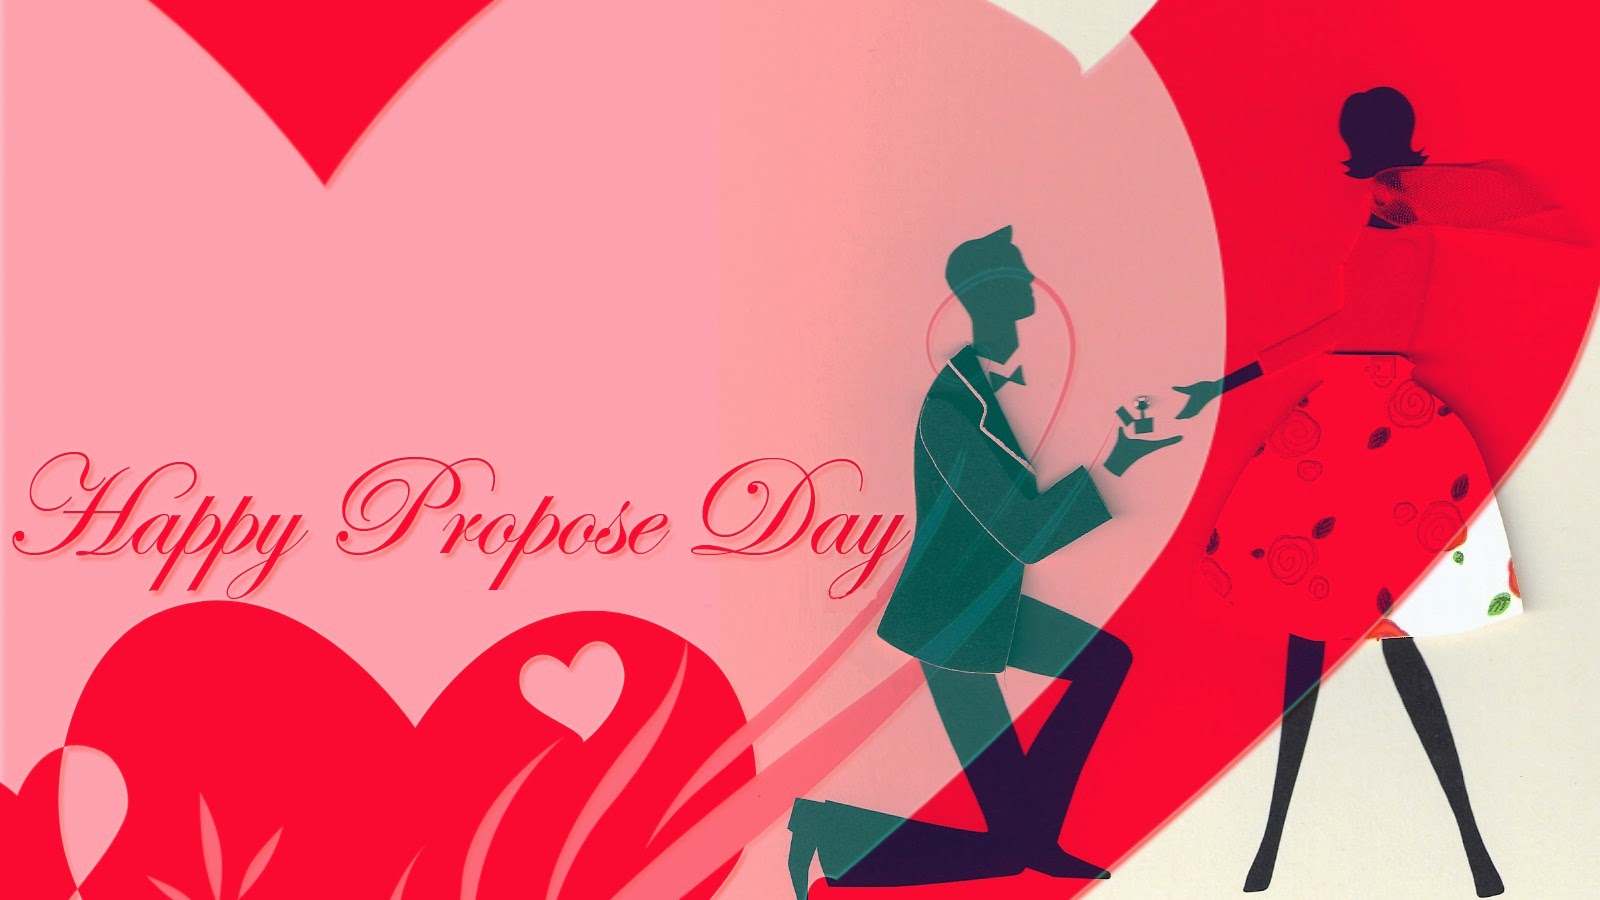 happy propose day 2022